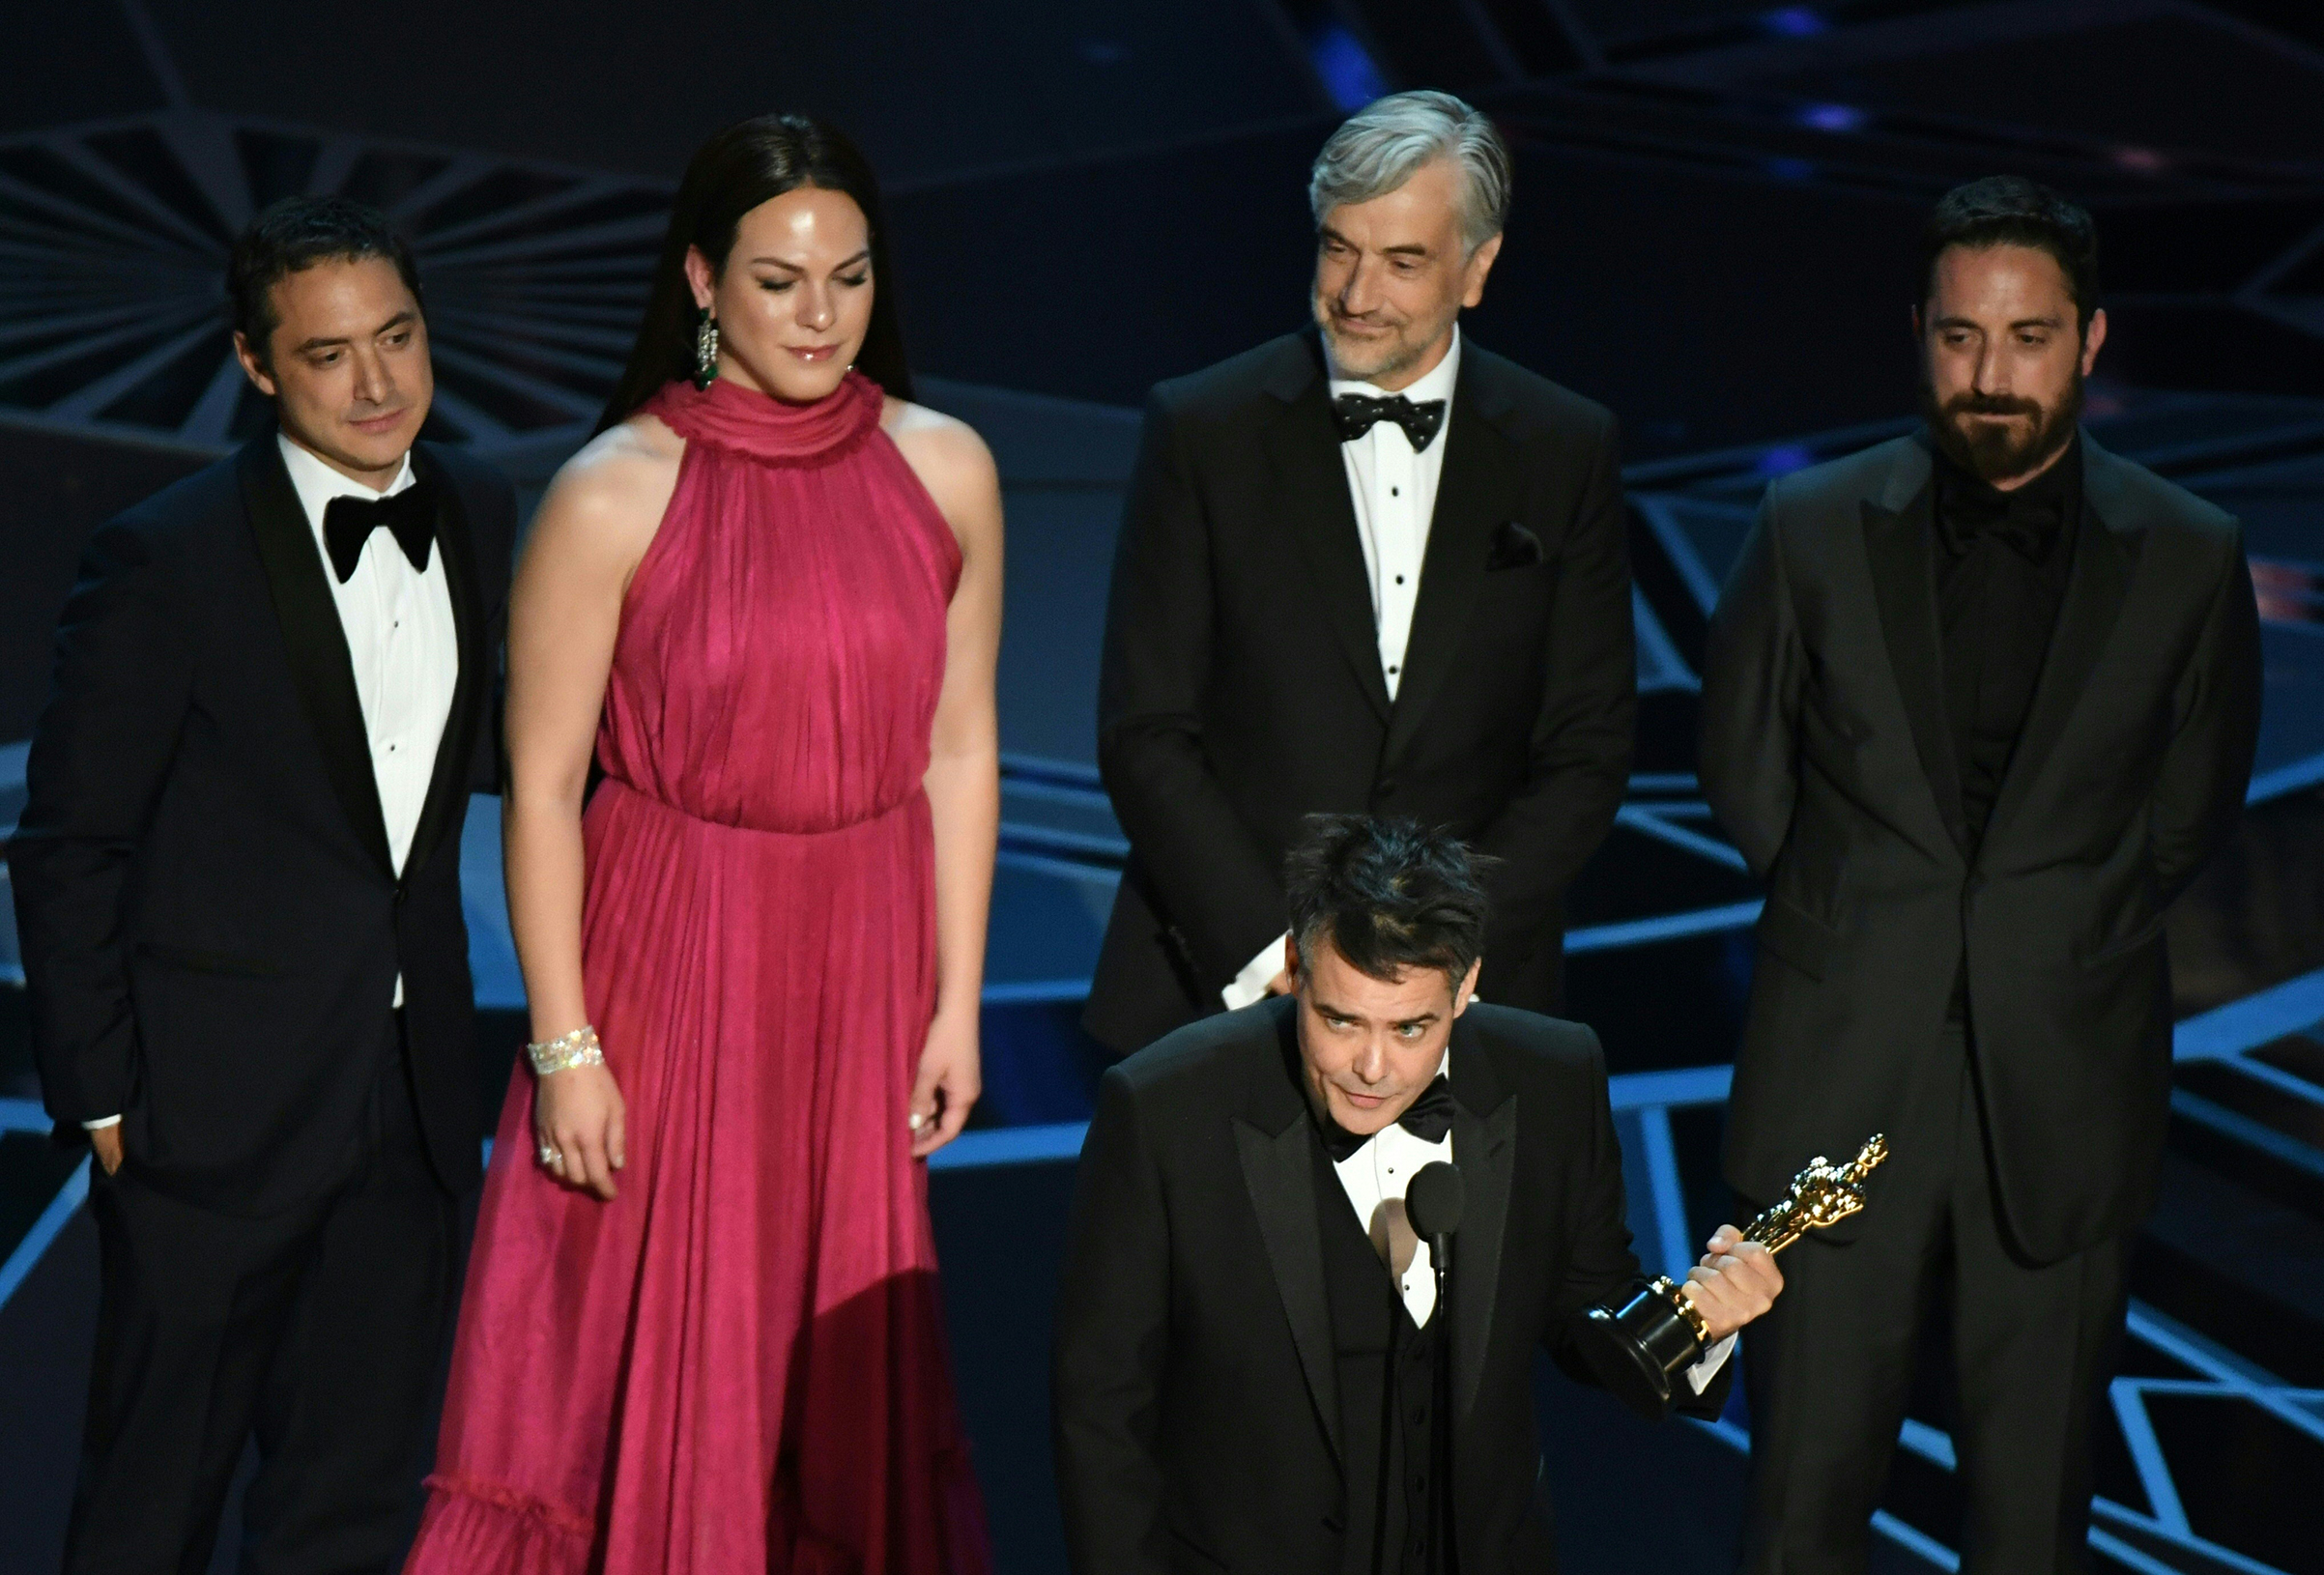 Chilean director Sebastian Lelio delivers a speech after he won the Oscar for Best Foreign Language Film for "A Fantastic Woman" during the 90th Annual Academy Awards show on March 4, 2018 in Hollywood. (Mark Ralston—AFP/Getty Images)